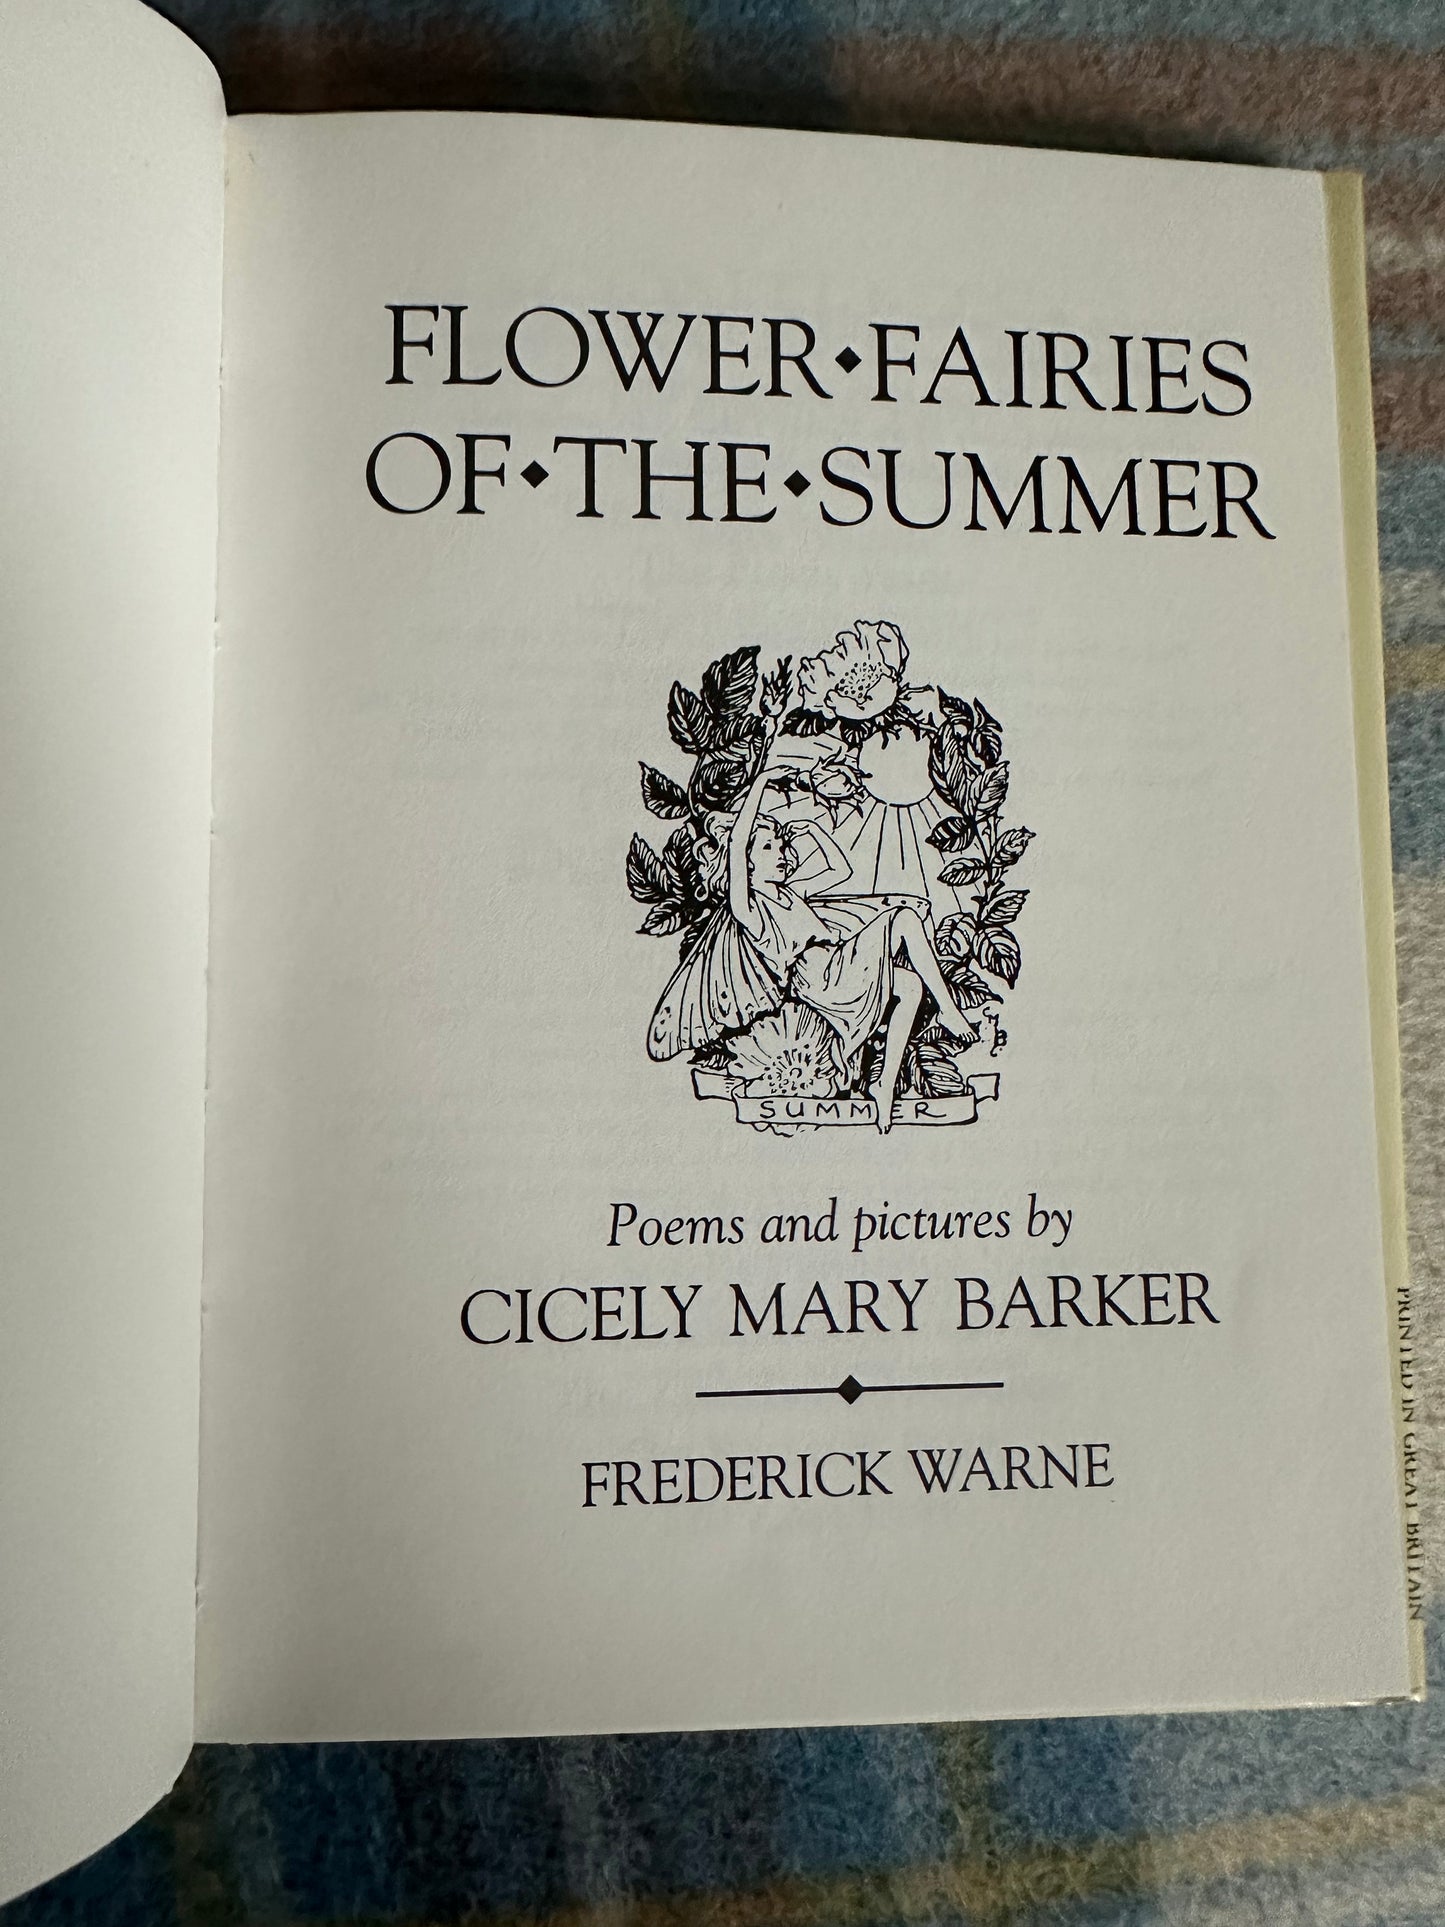 1990 Flower Fairies Of The Summer - Cicely Mary Barker(Frederick Warne & Co Ltd